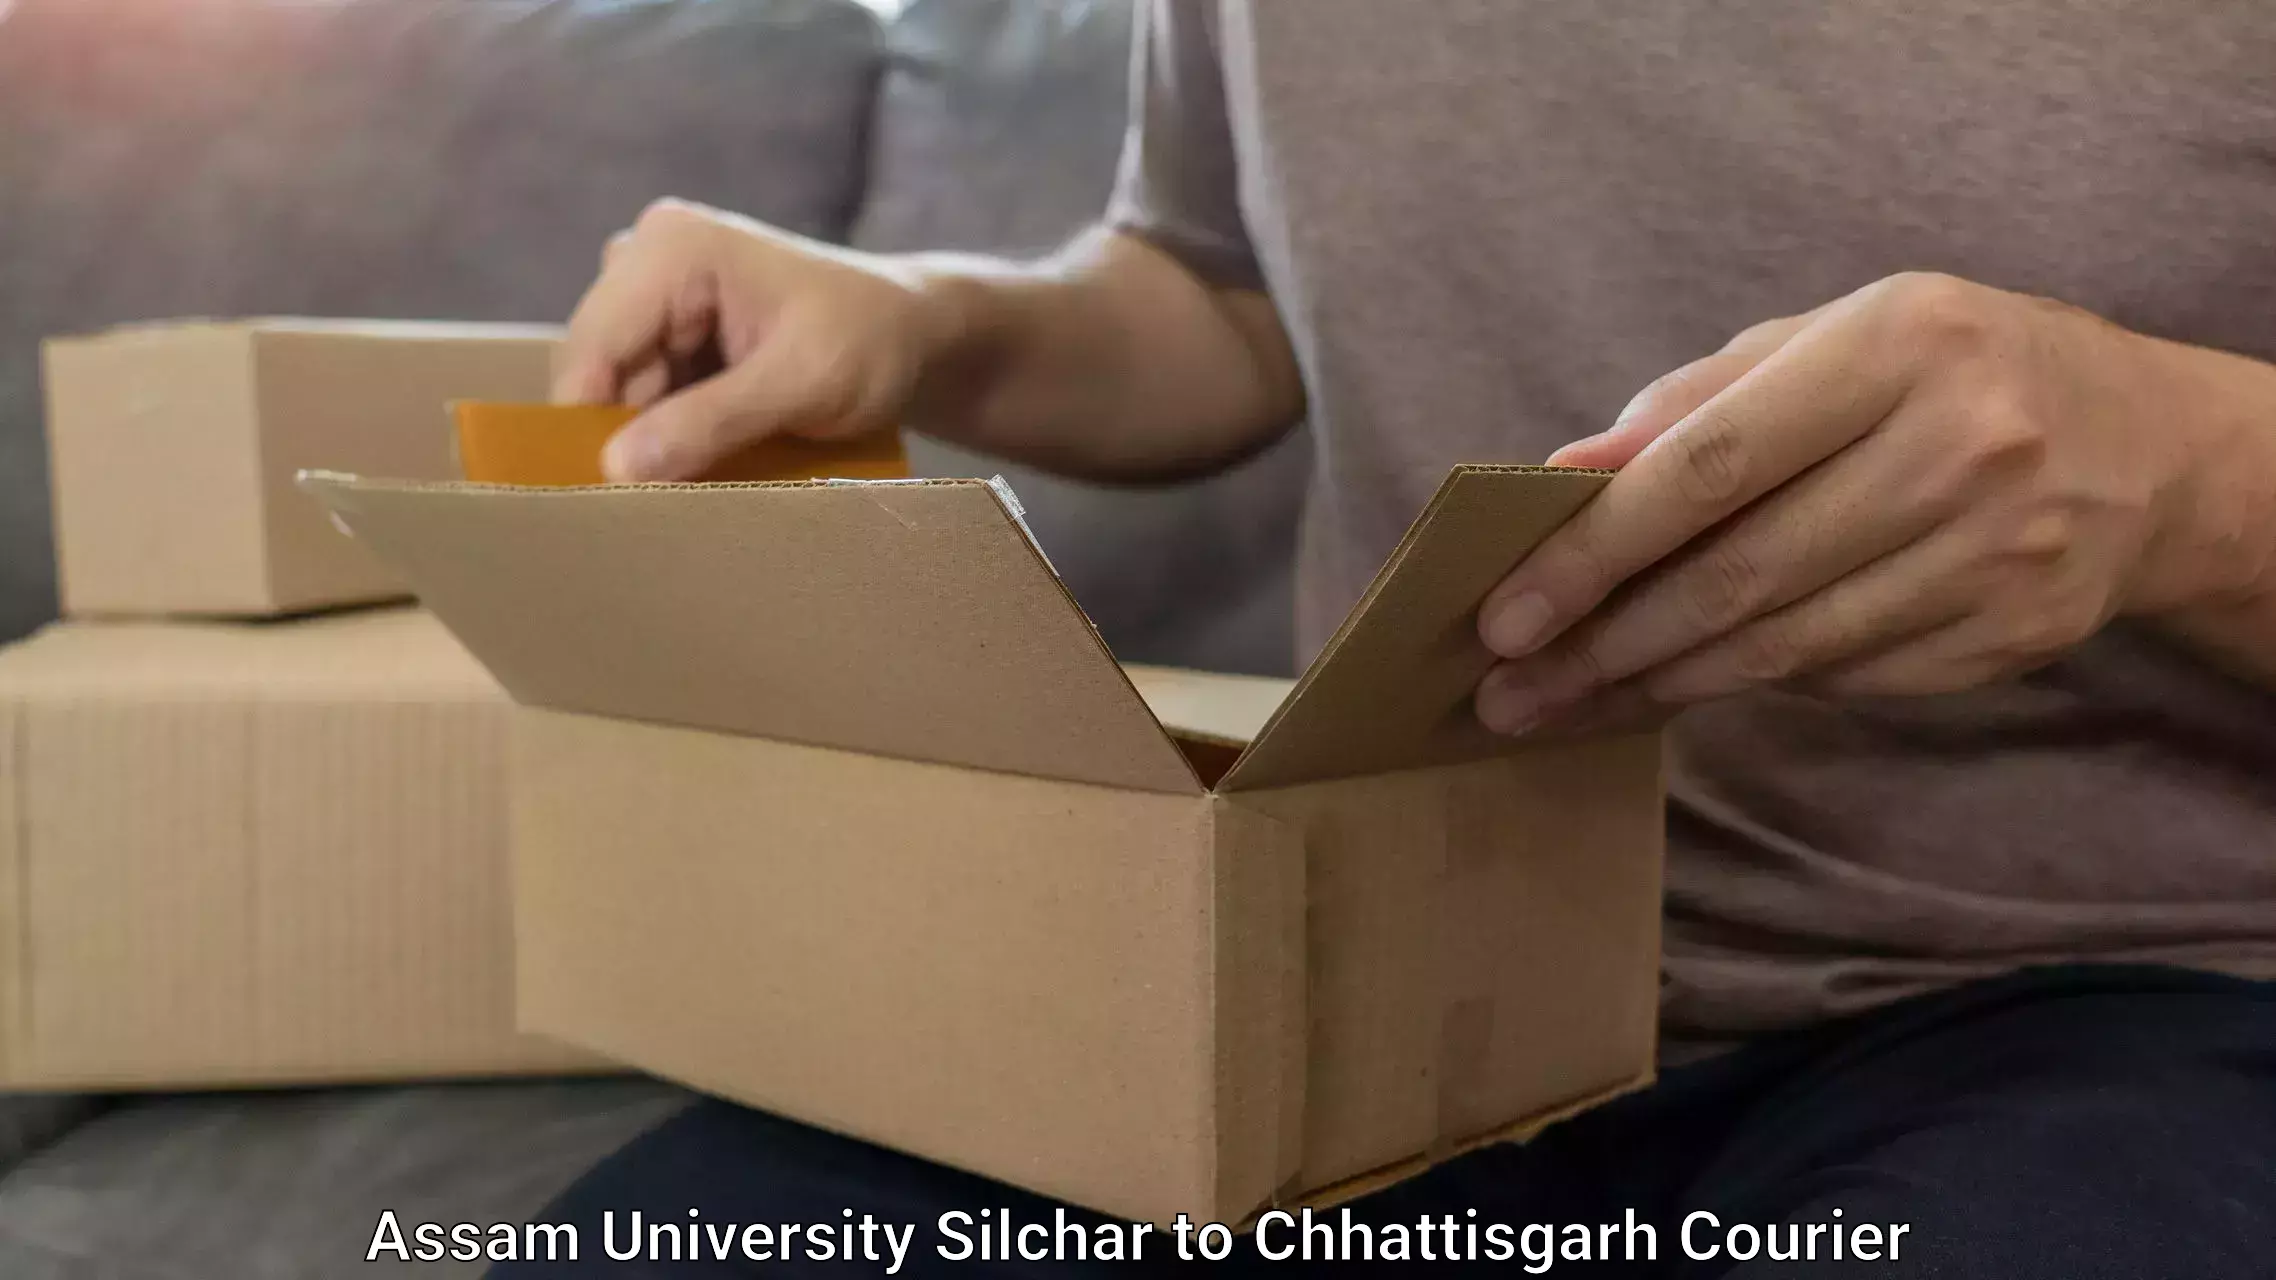 Online luggage shipping in Assam University Silchar to Bilaspur